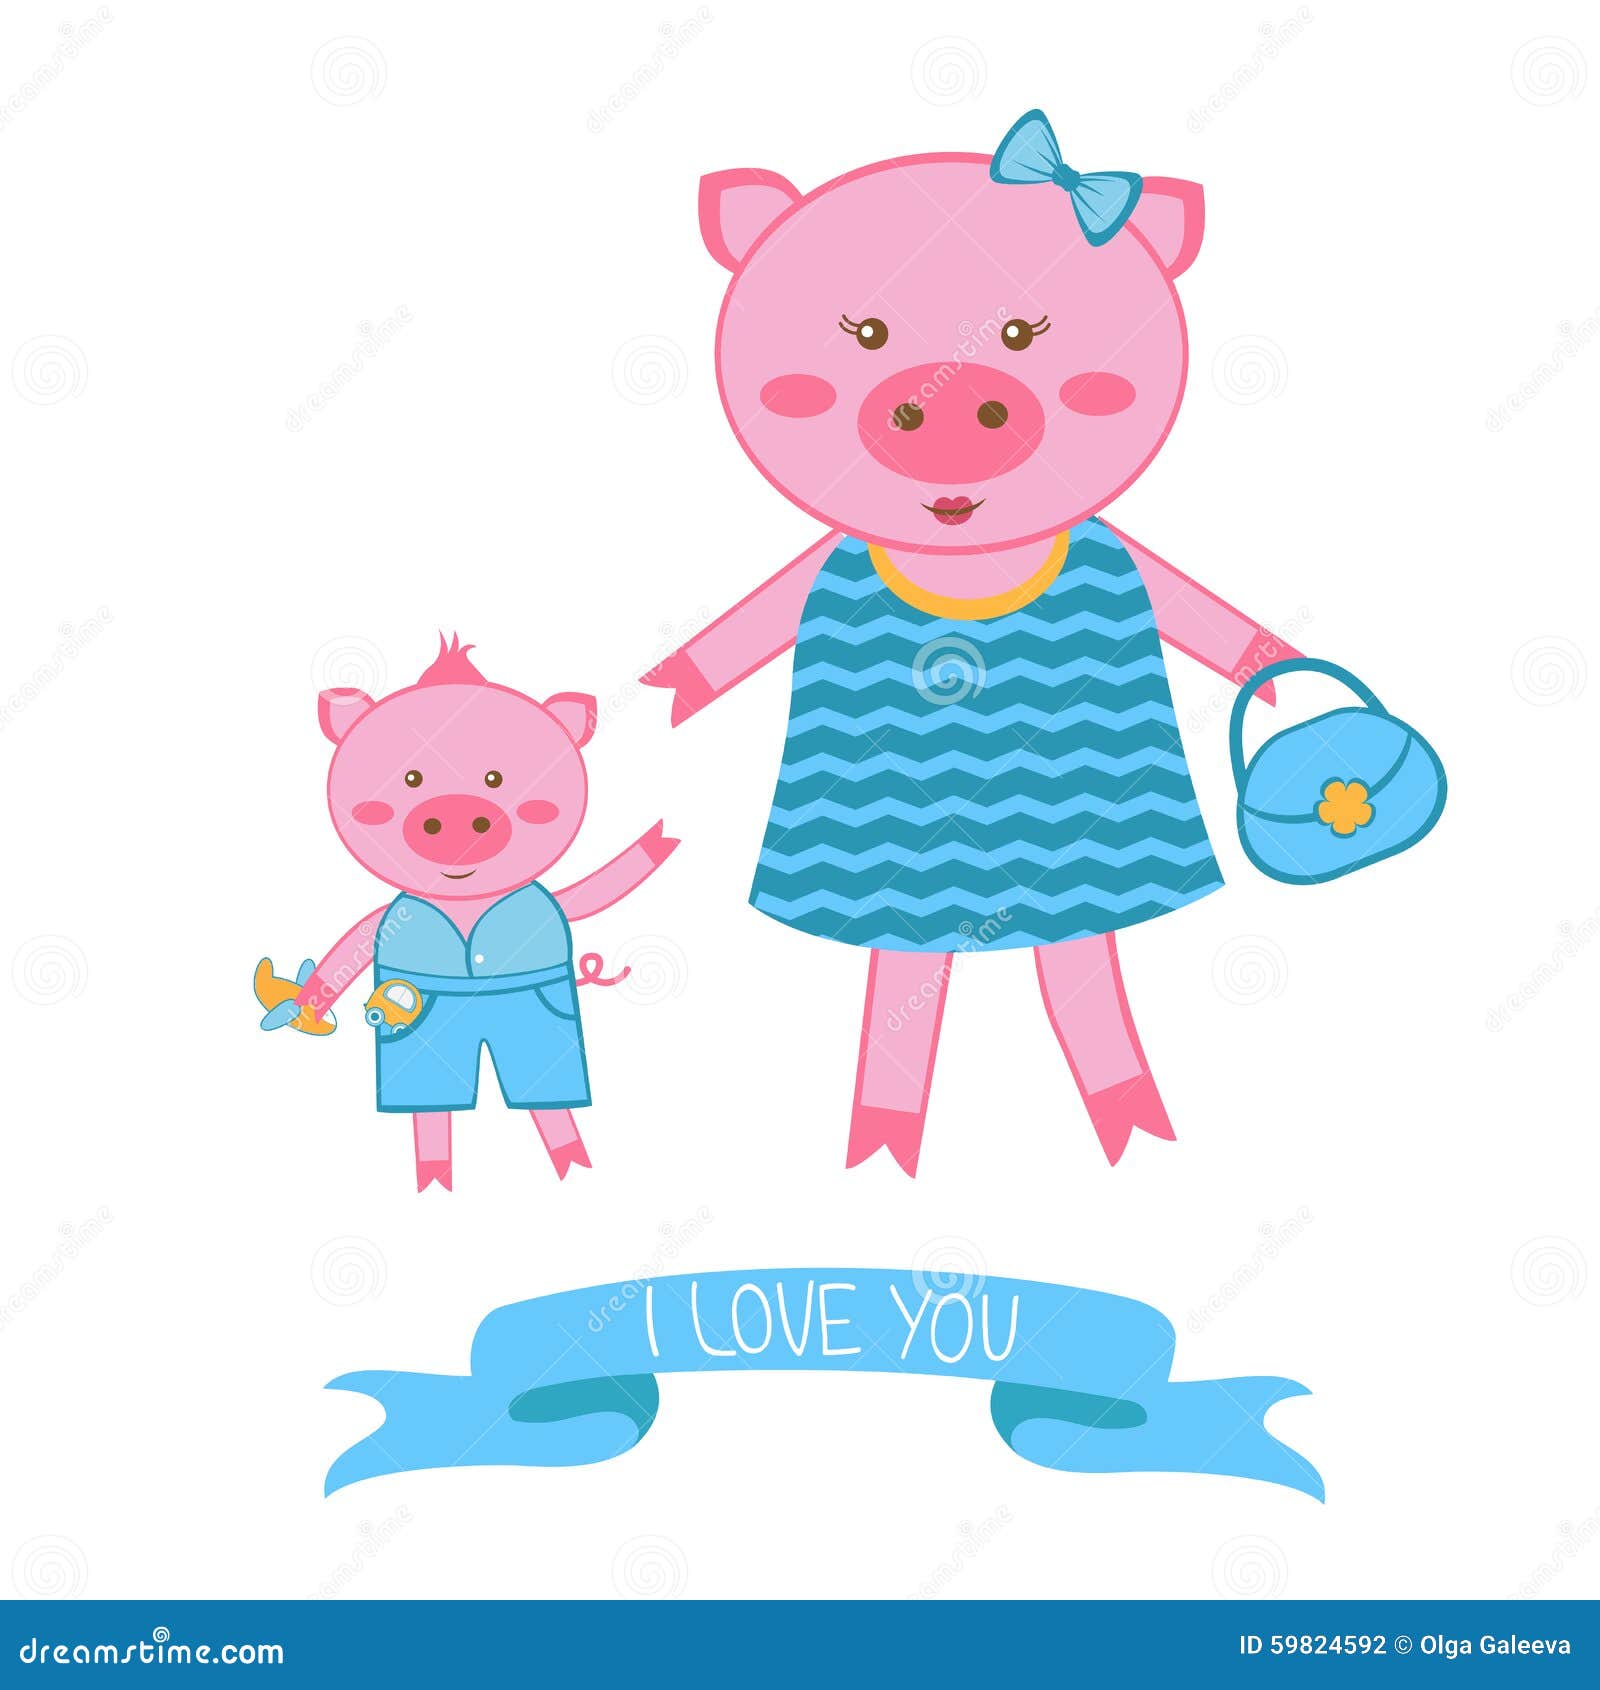 mother pig clipart - photo #11